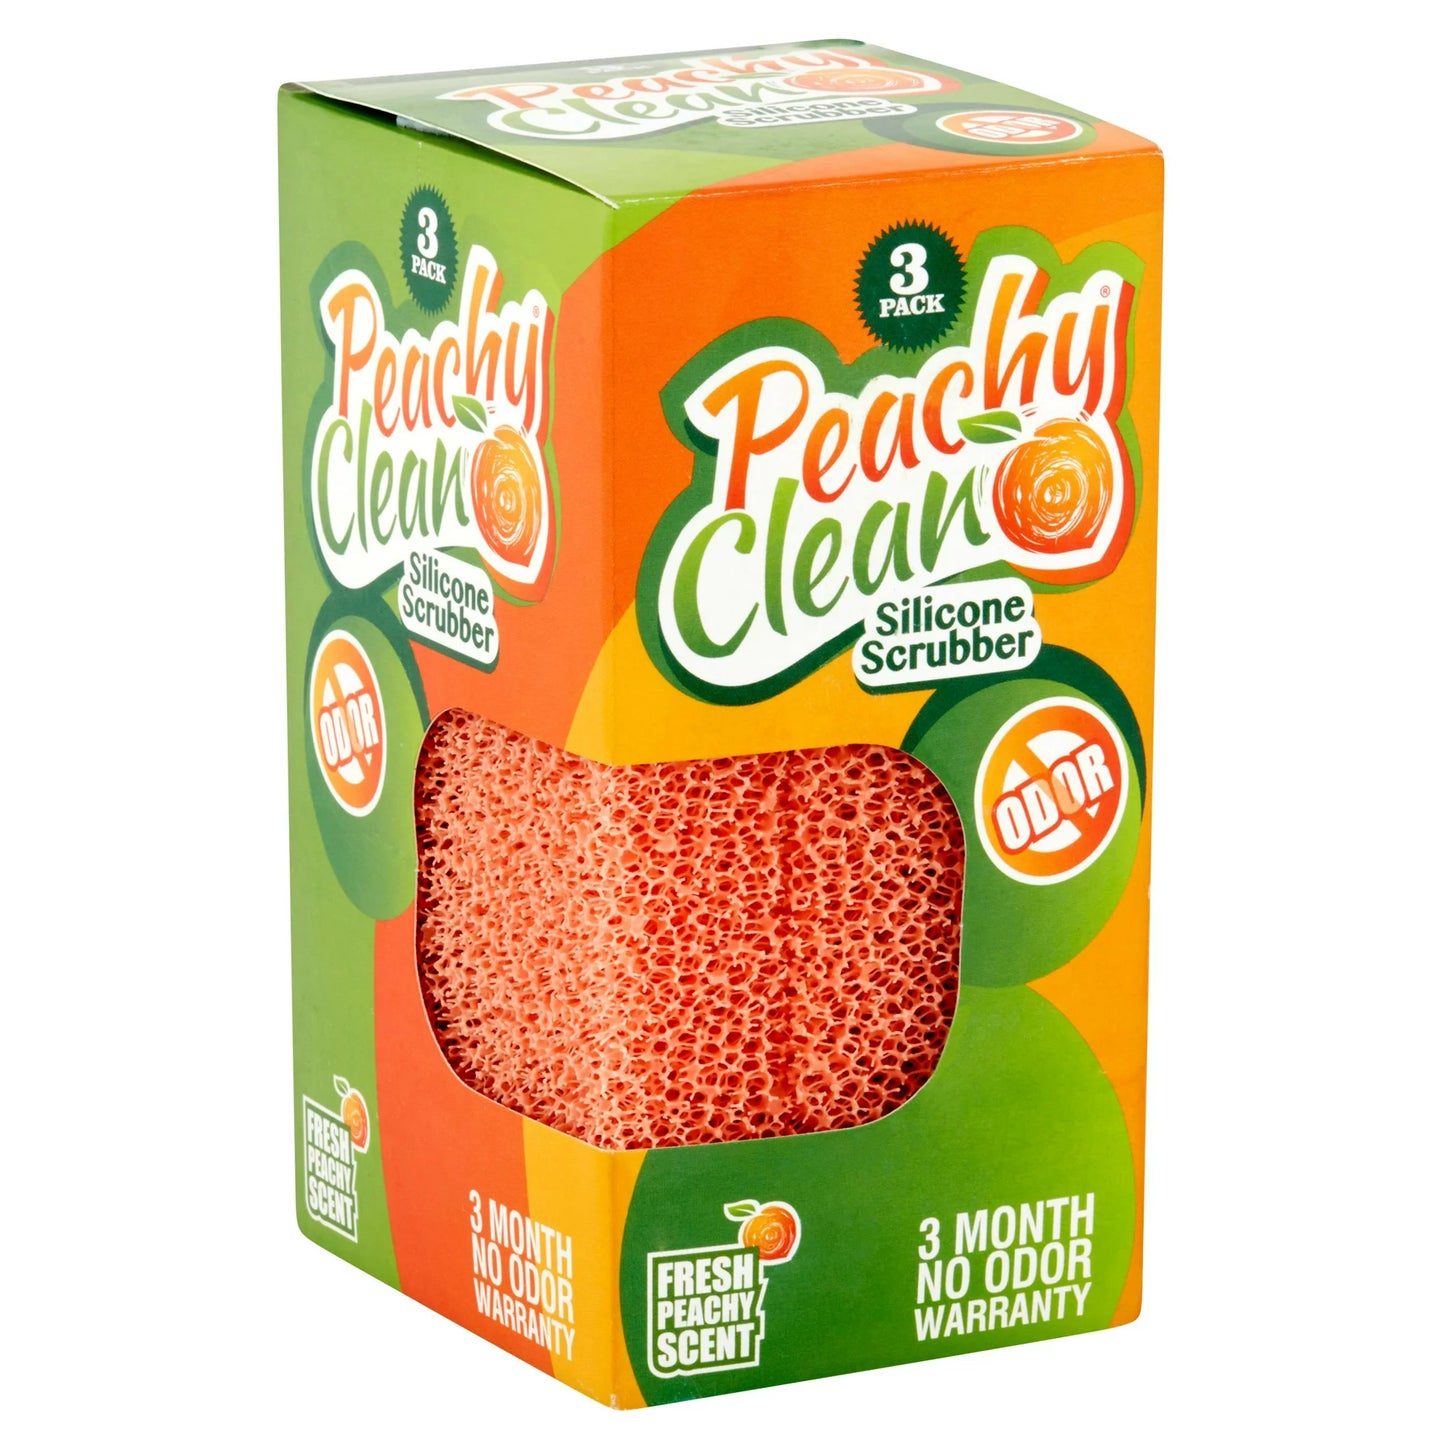 Peachy Clean Silicone Scrubbers, 3 count